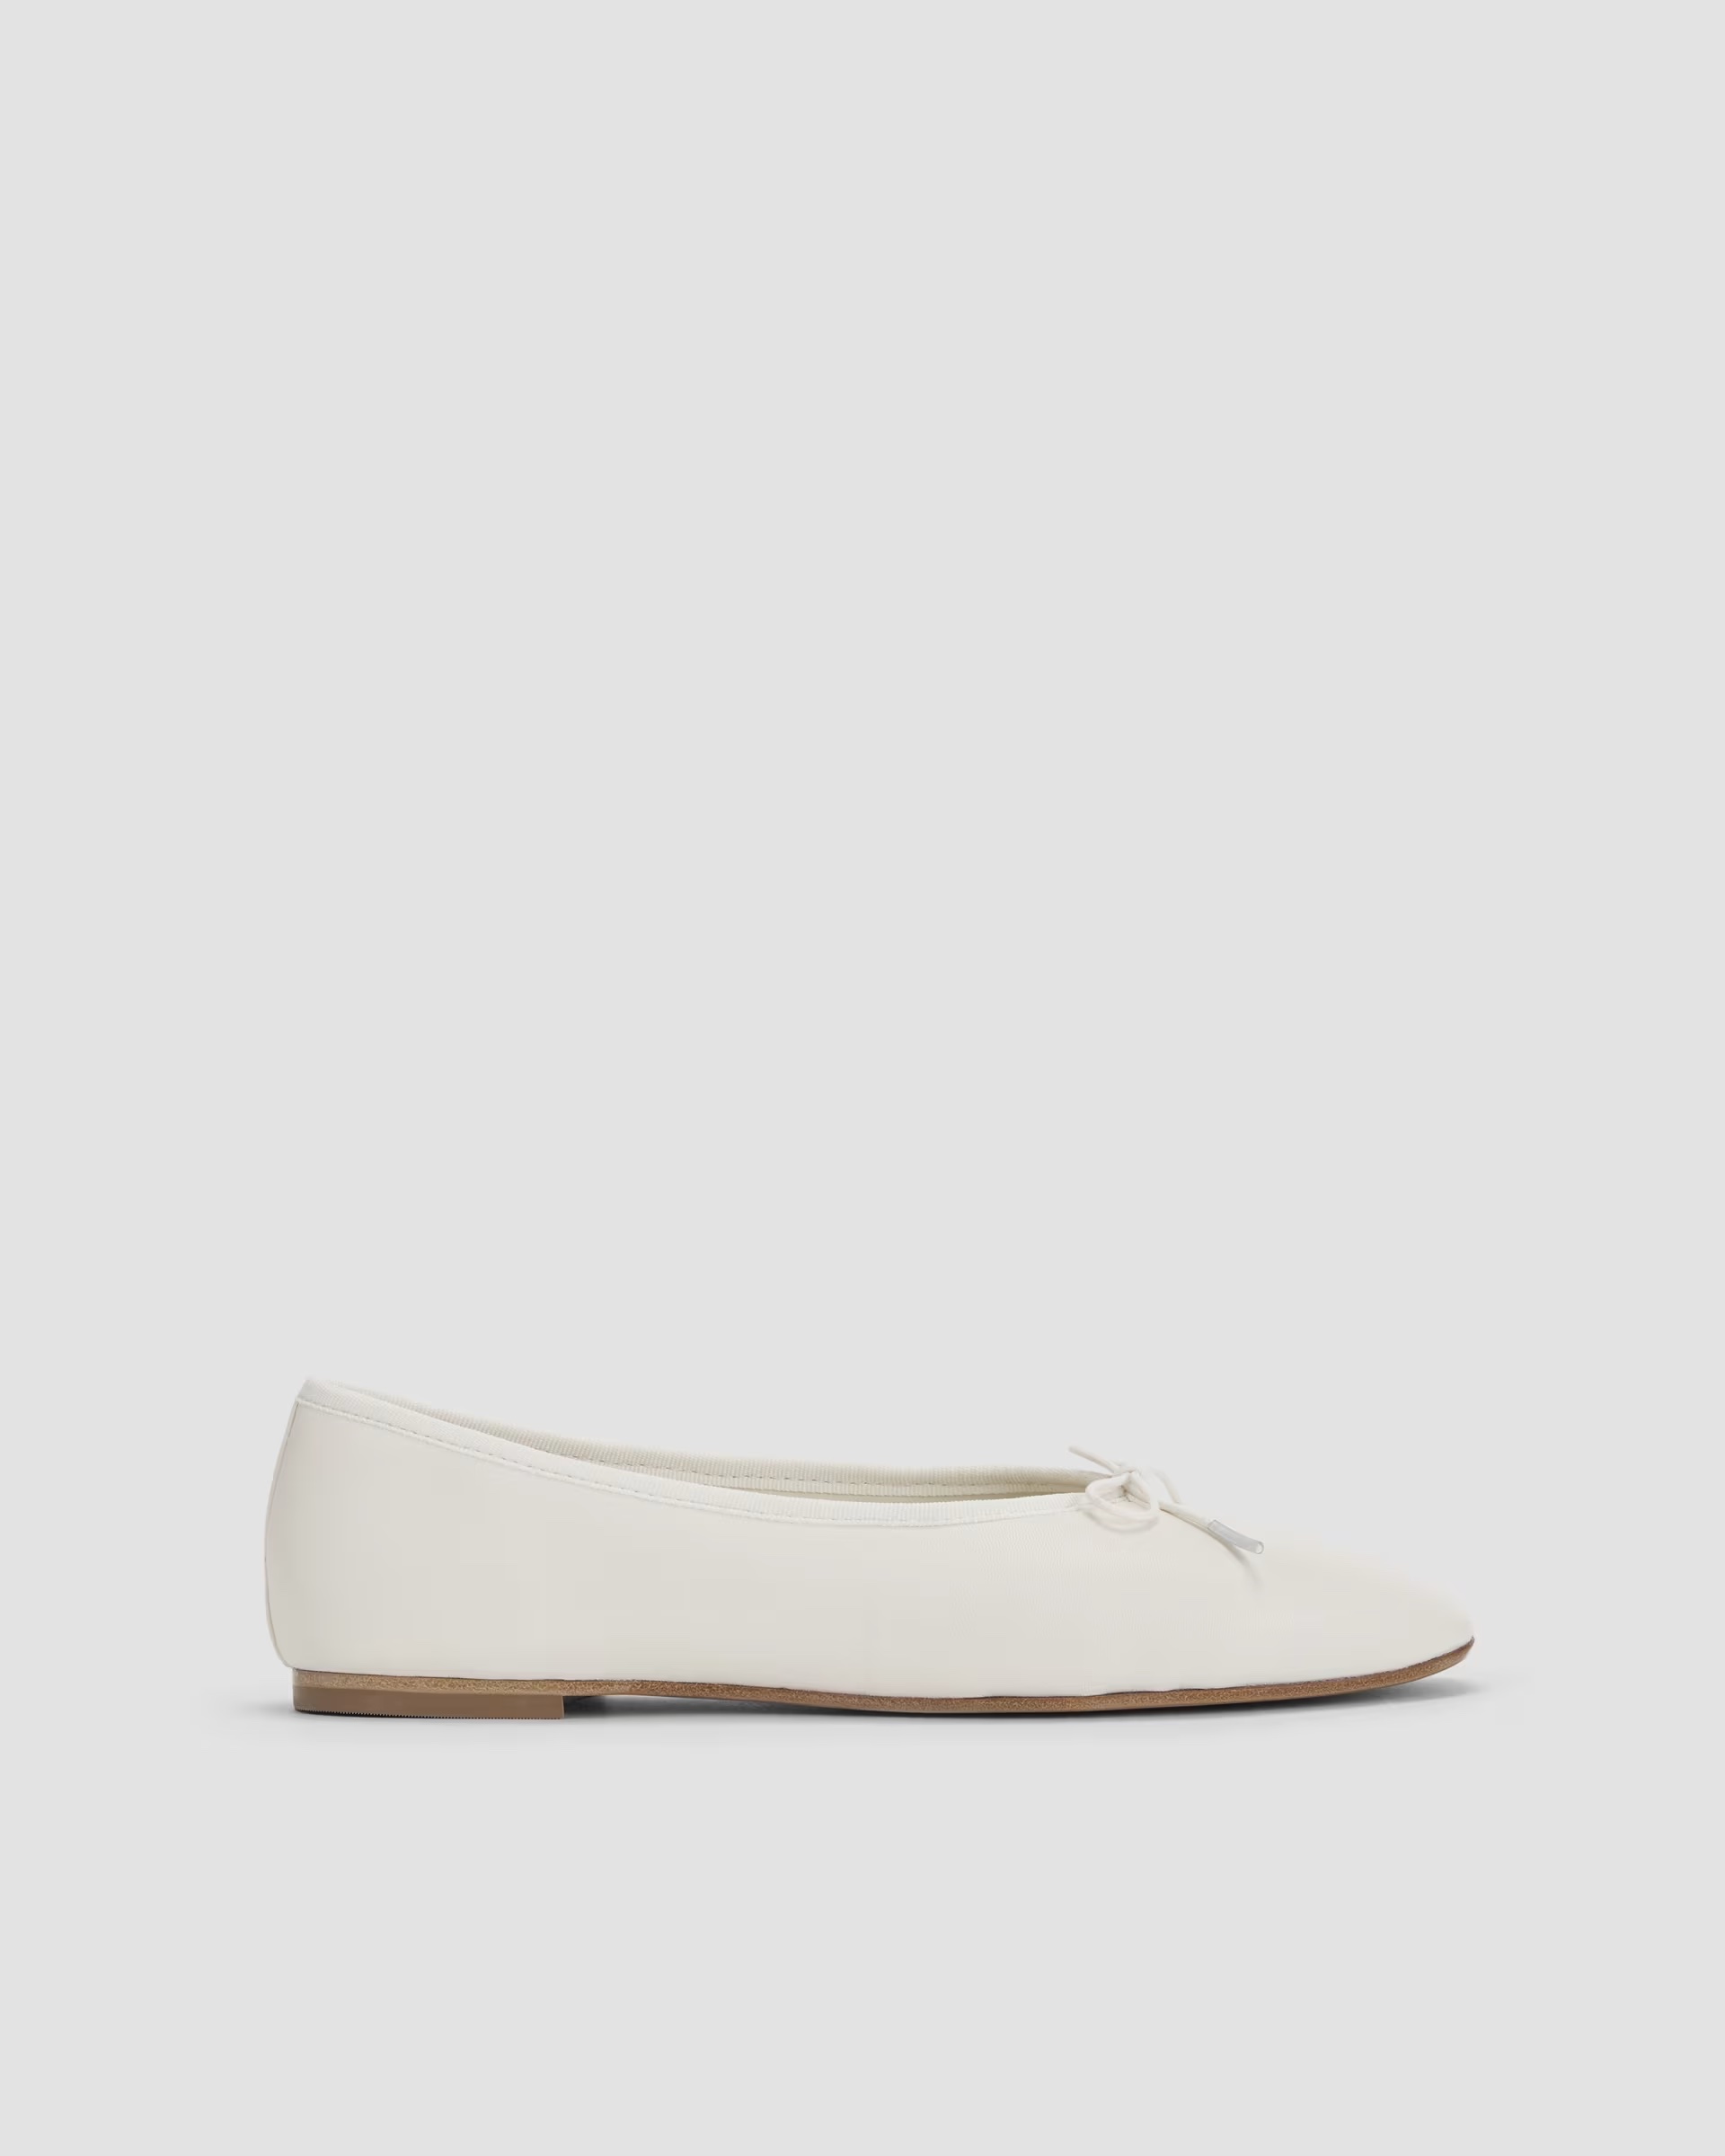 everlane, The Day Ballet Flat